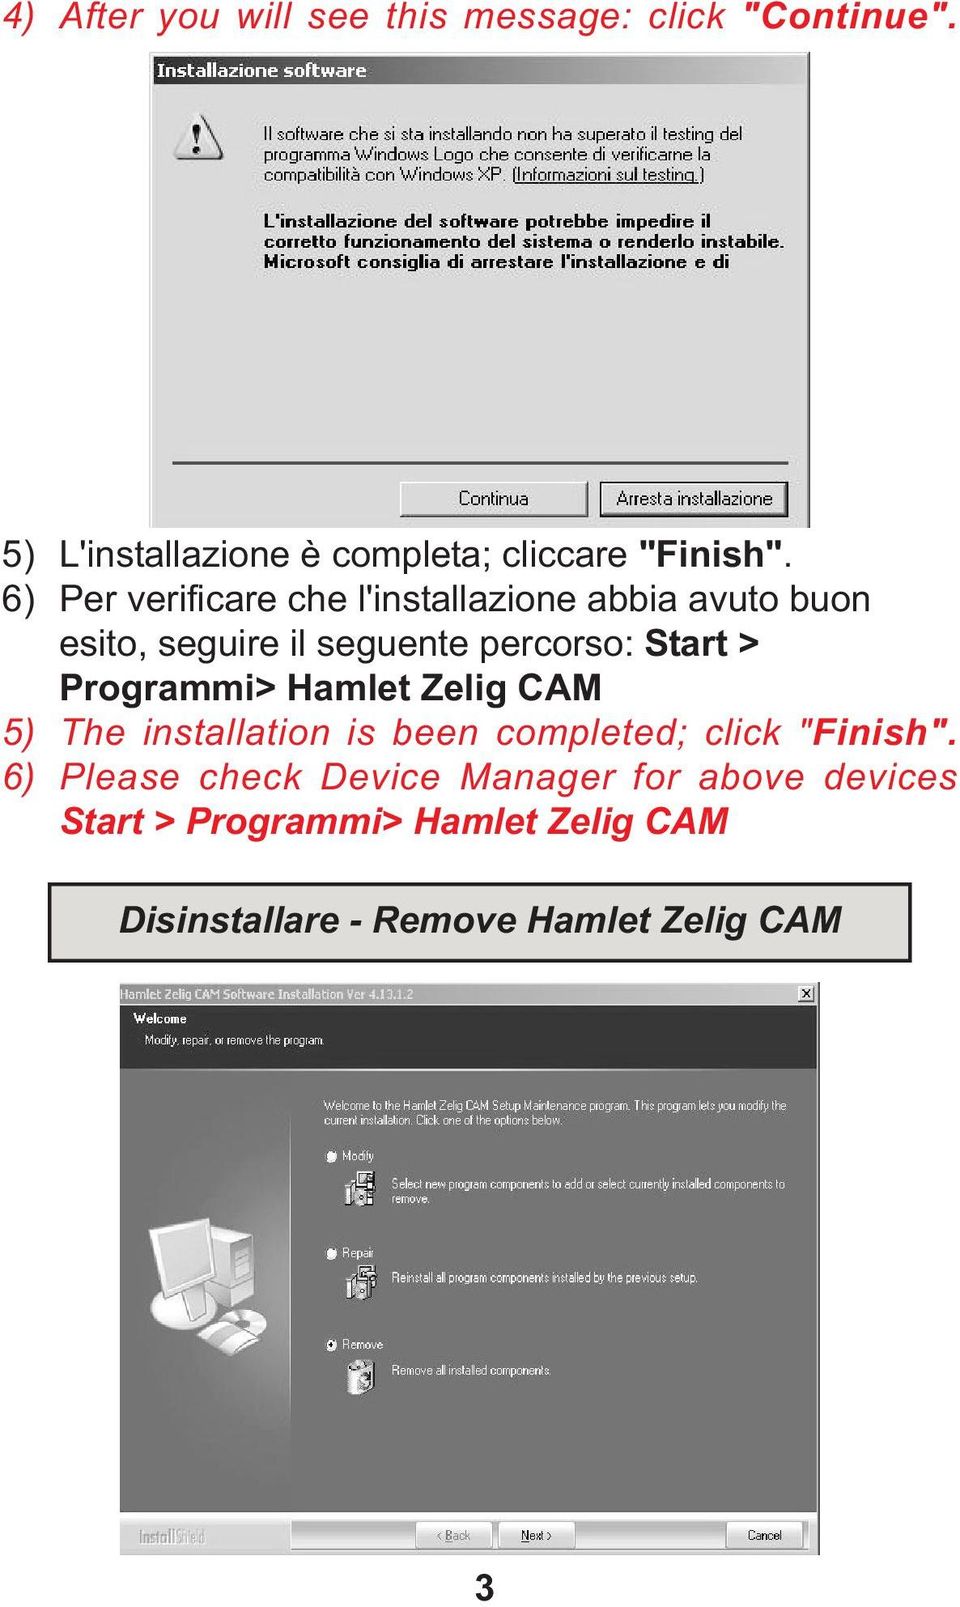 Programmi> Hamlet Zelig CAM 5) The installation is been completed; click "Finish".